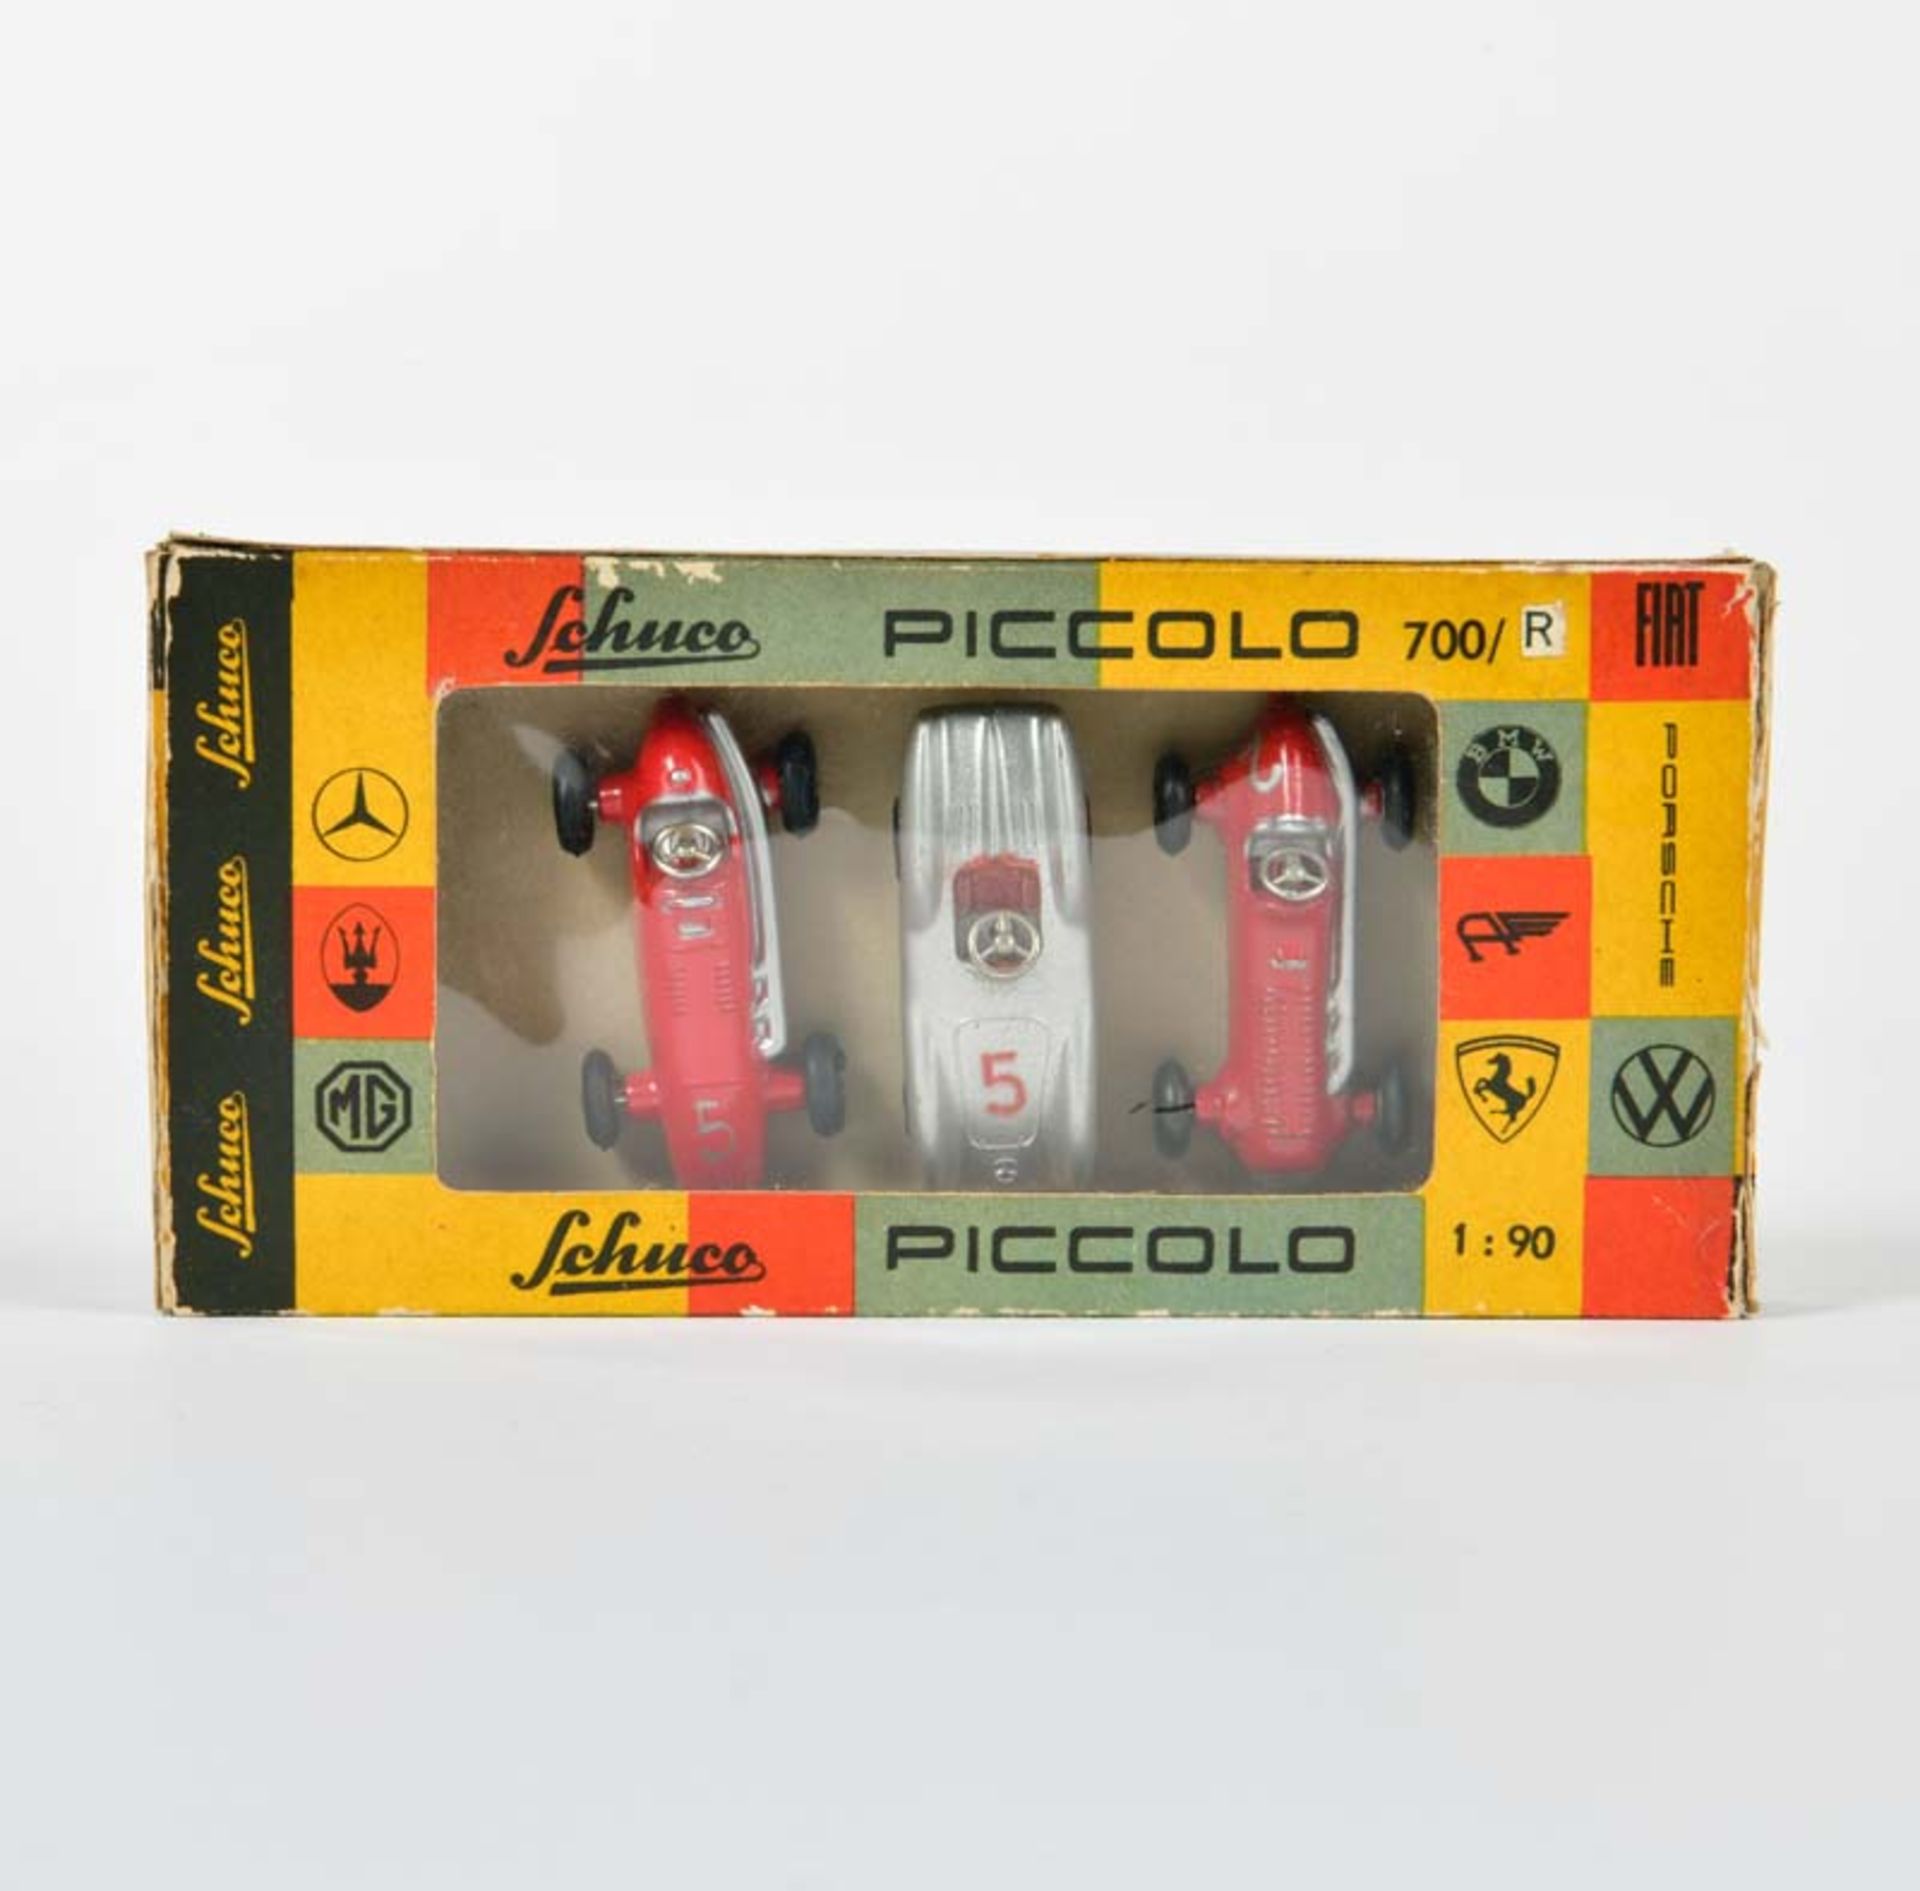 Schuco, Piccolo box 700/R with 3 racing cars, W.-Germany, 1:90, box C 2-3 (2 flaps missing)